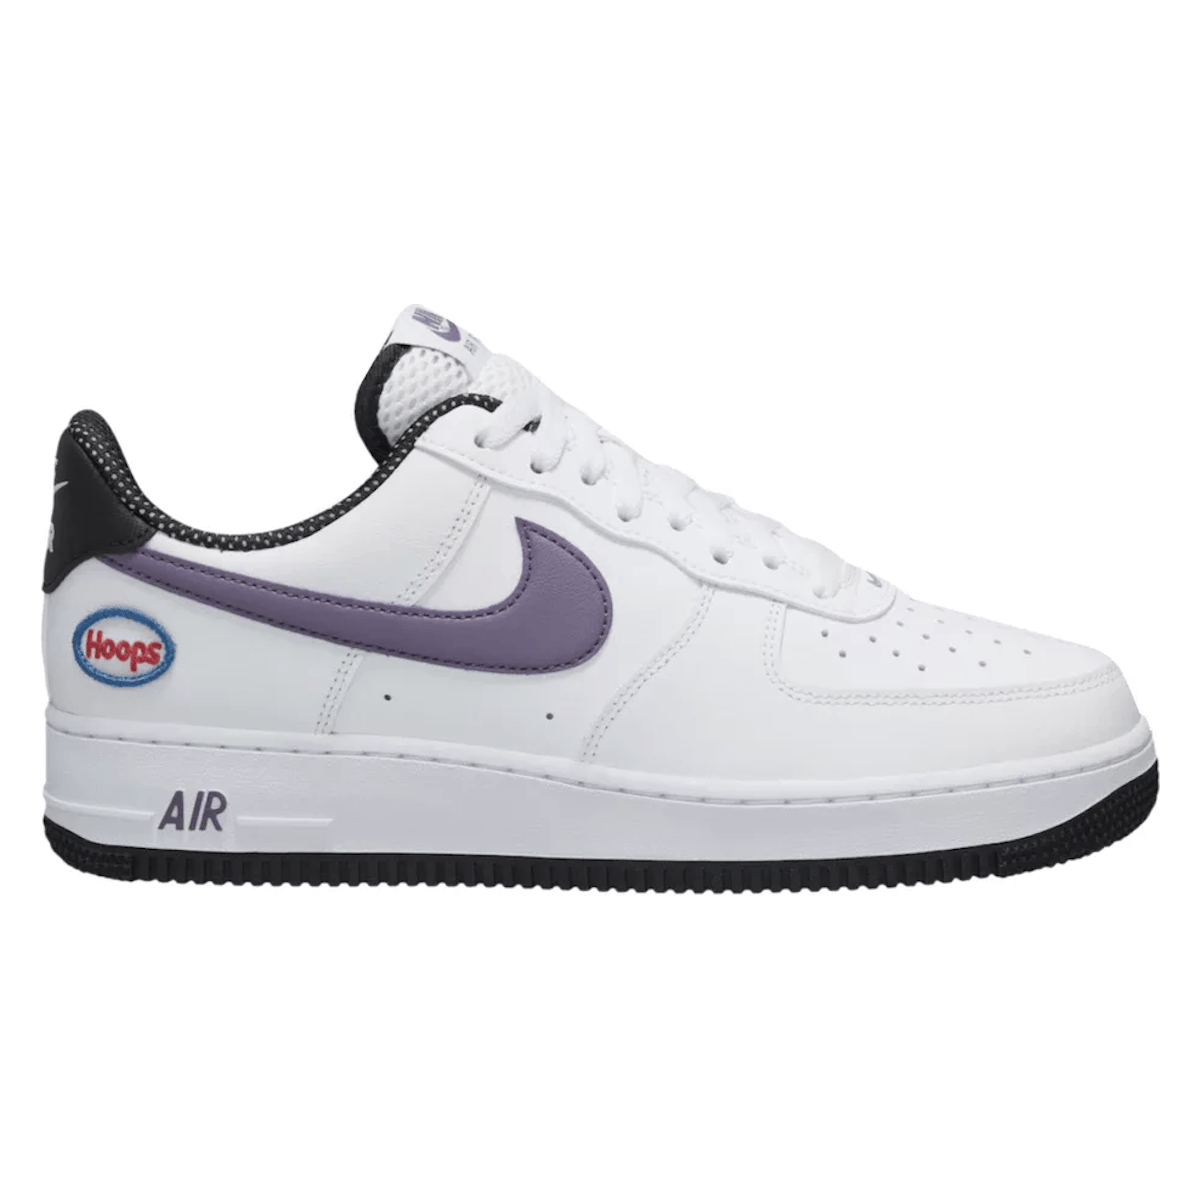 Nike Air Force 1 Low Hoops "White Canyon Purple"